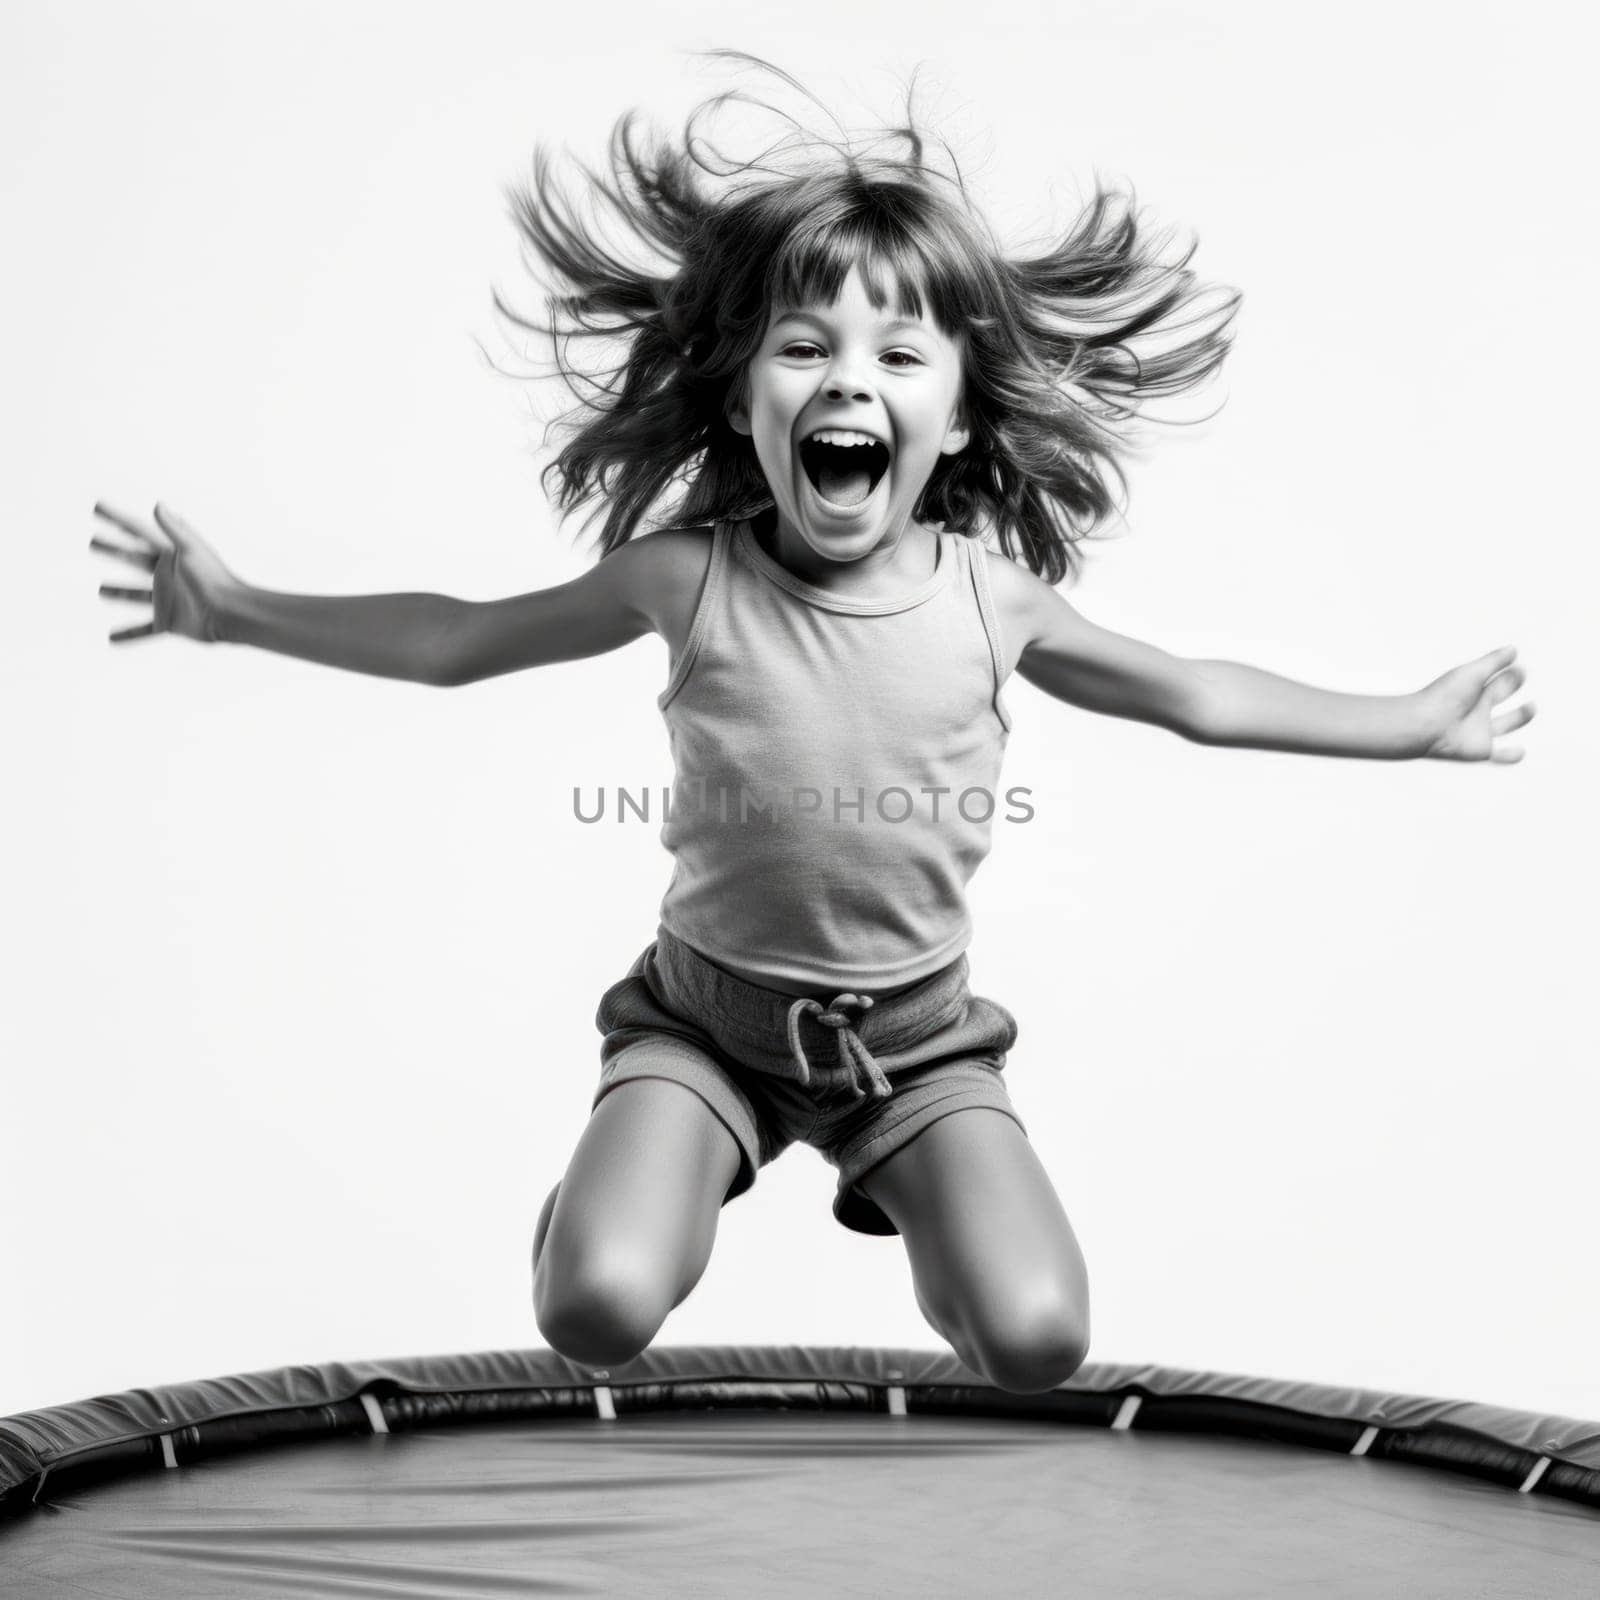 A little girl jumping on a trampoline in the air